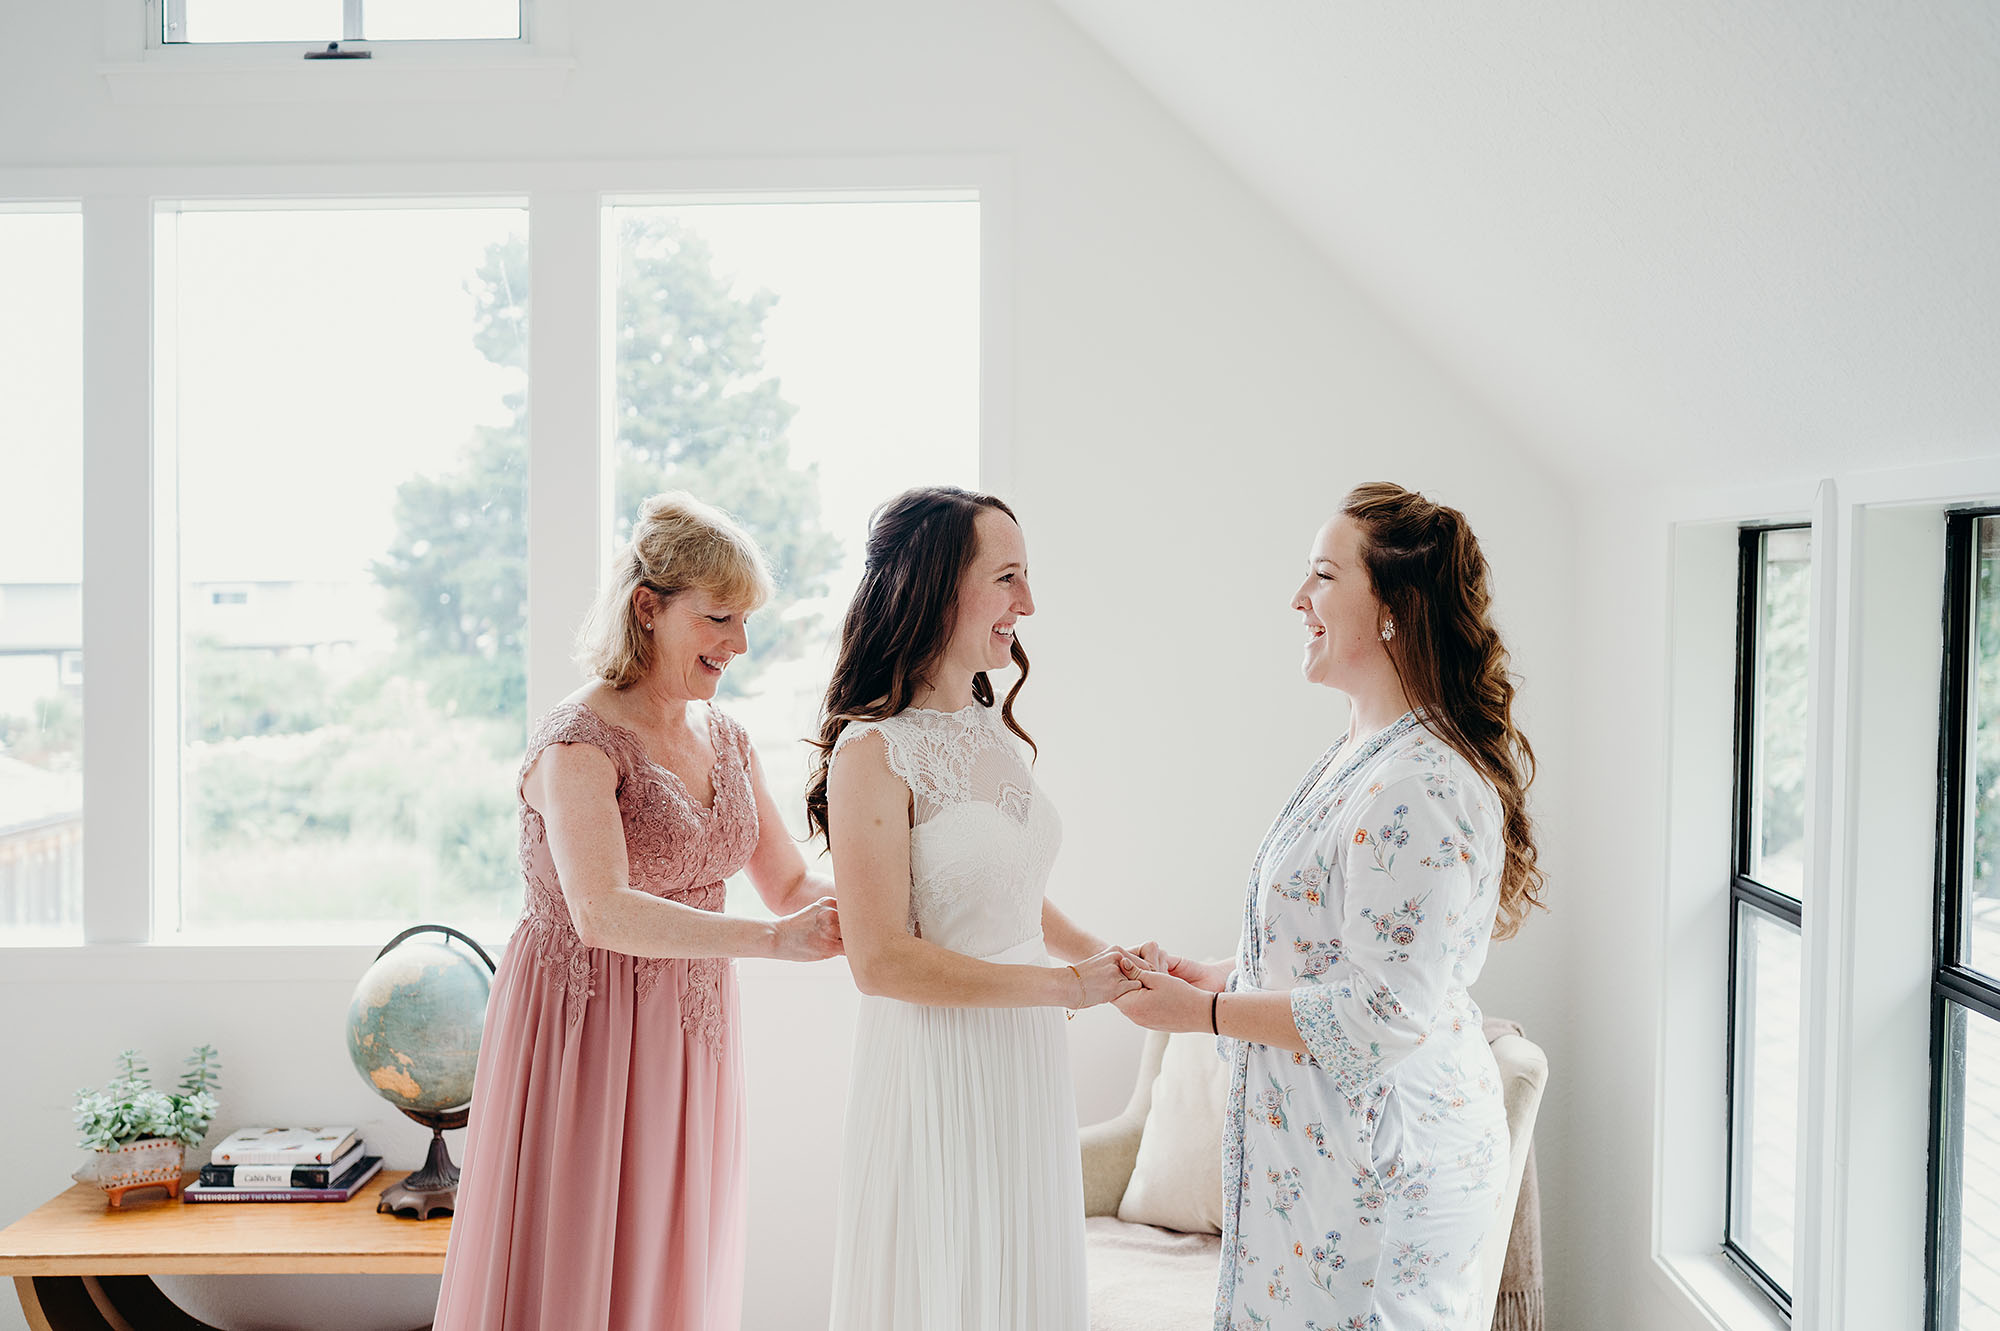 Bride & Bridesmaids Getting Ready by Briana Morrison Photography